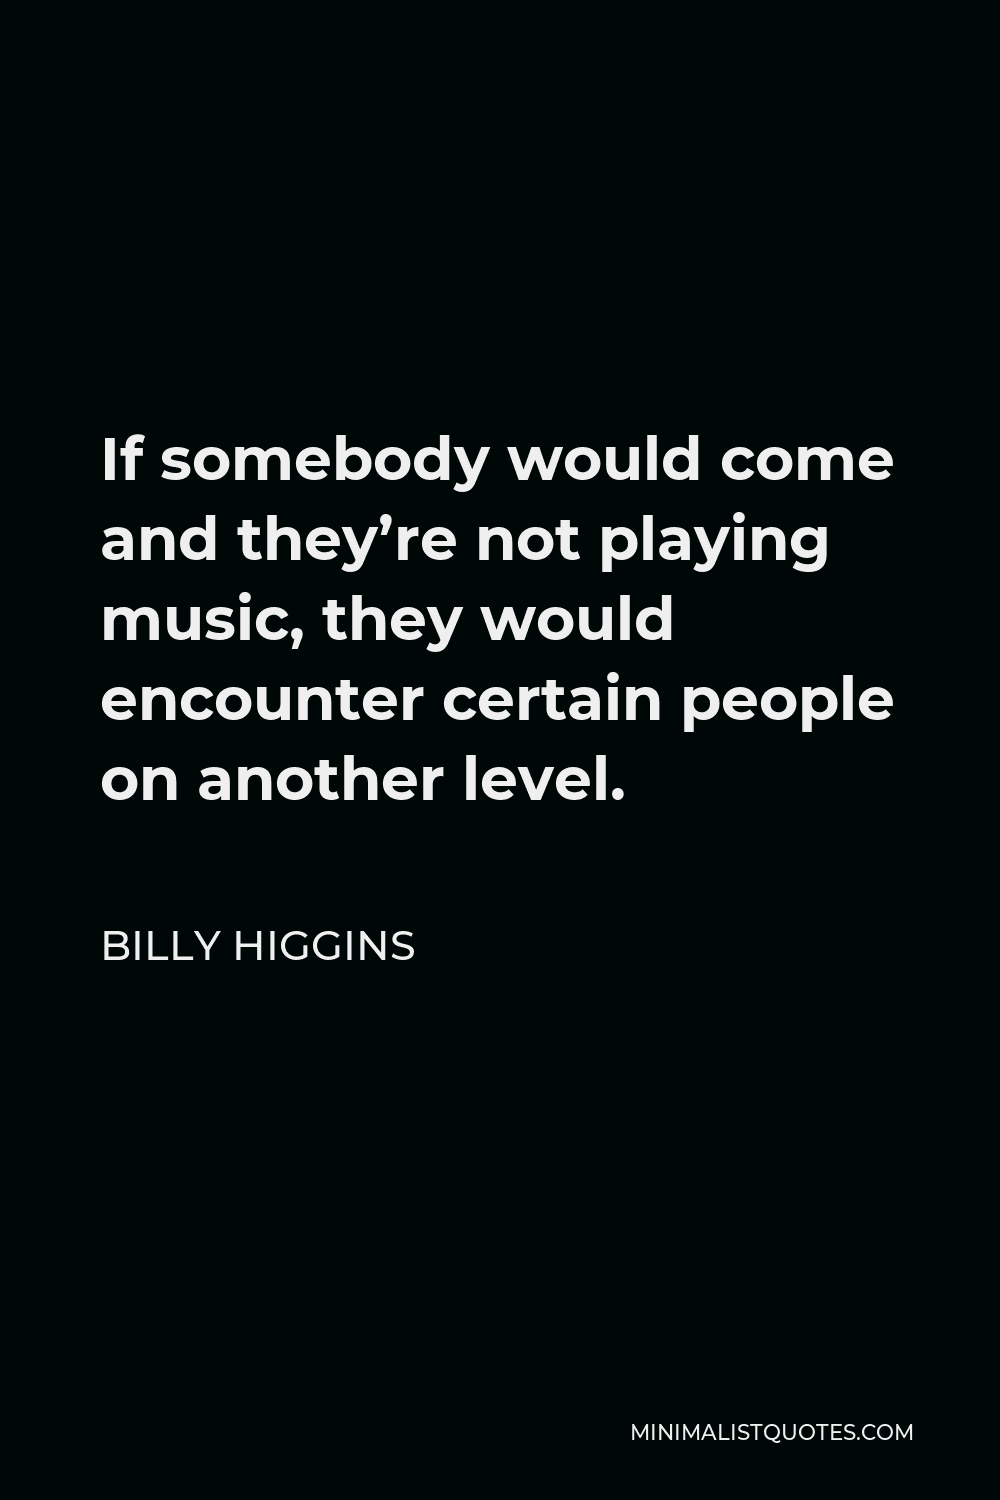 Billy Higgins Quote - If somebody would come and they’re not playing music, they would encounter certain people on another level.